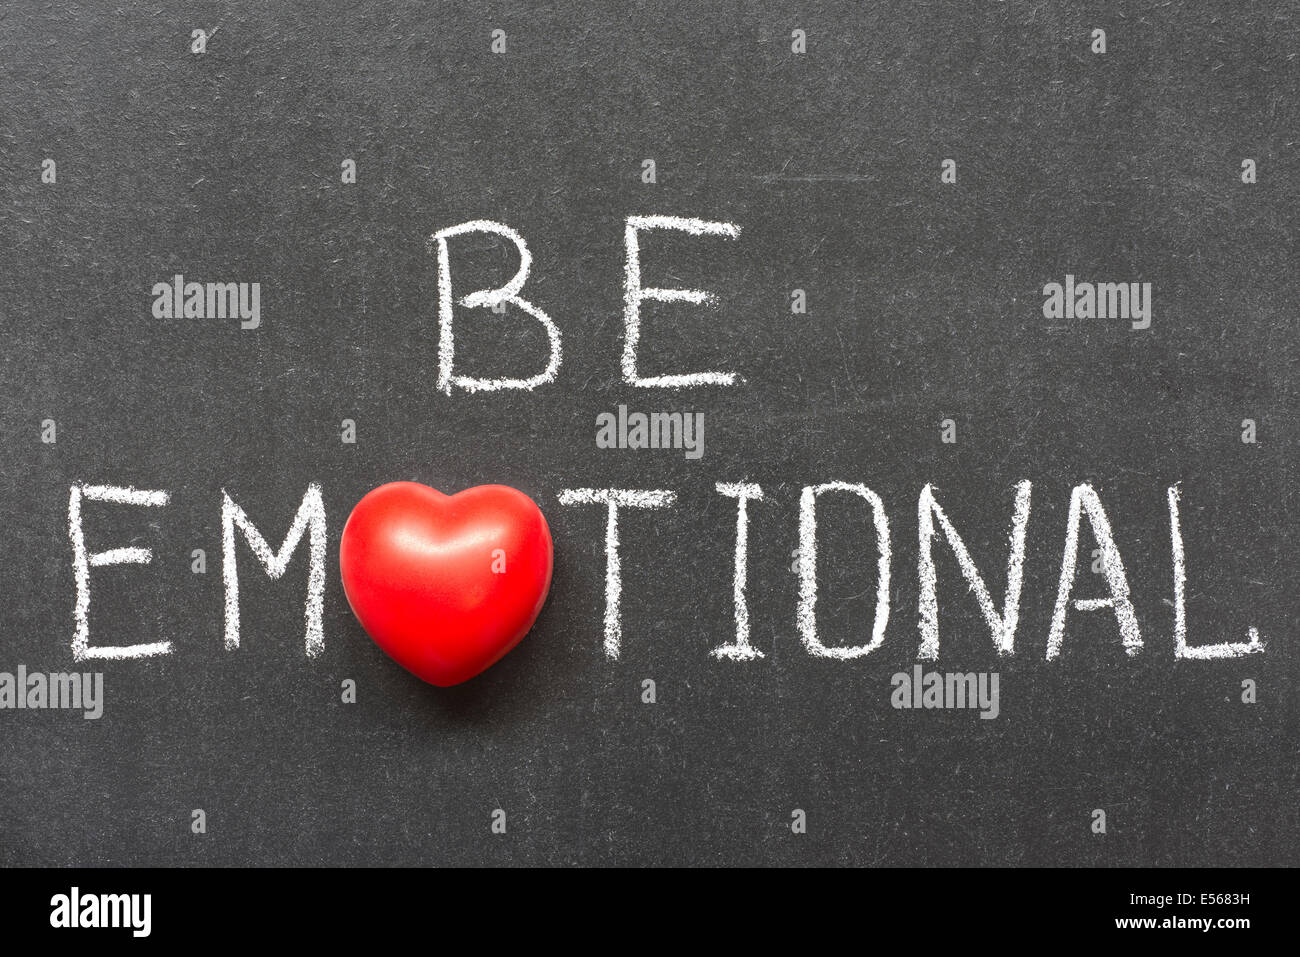 be emotional phrase handwritten on chalkboard with heart symbol instead of O Stock Photo